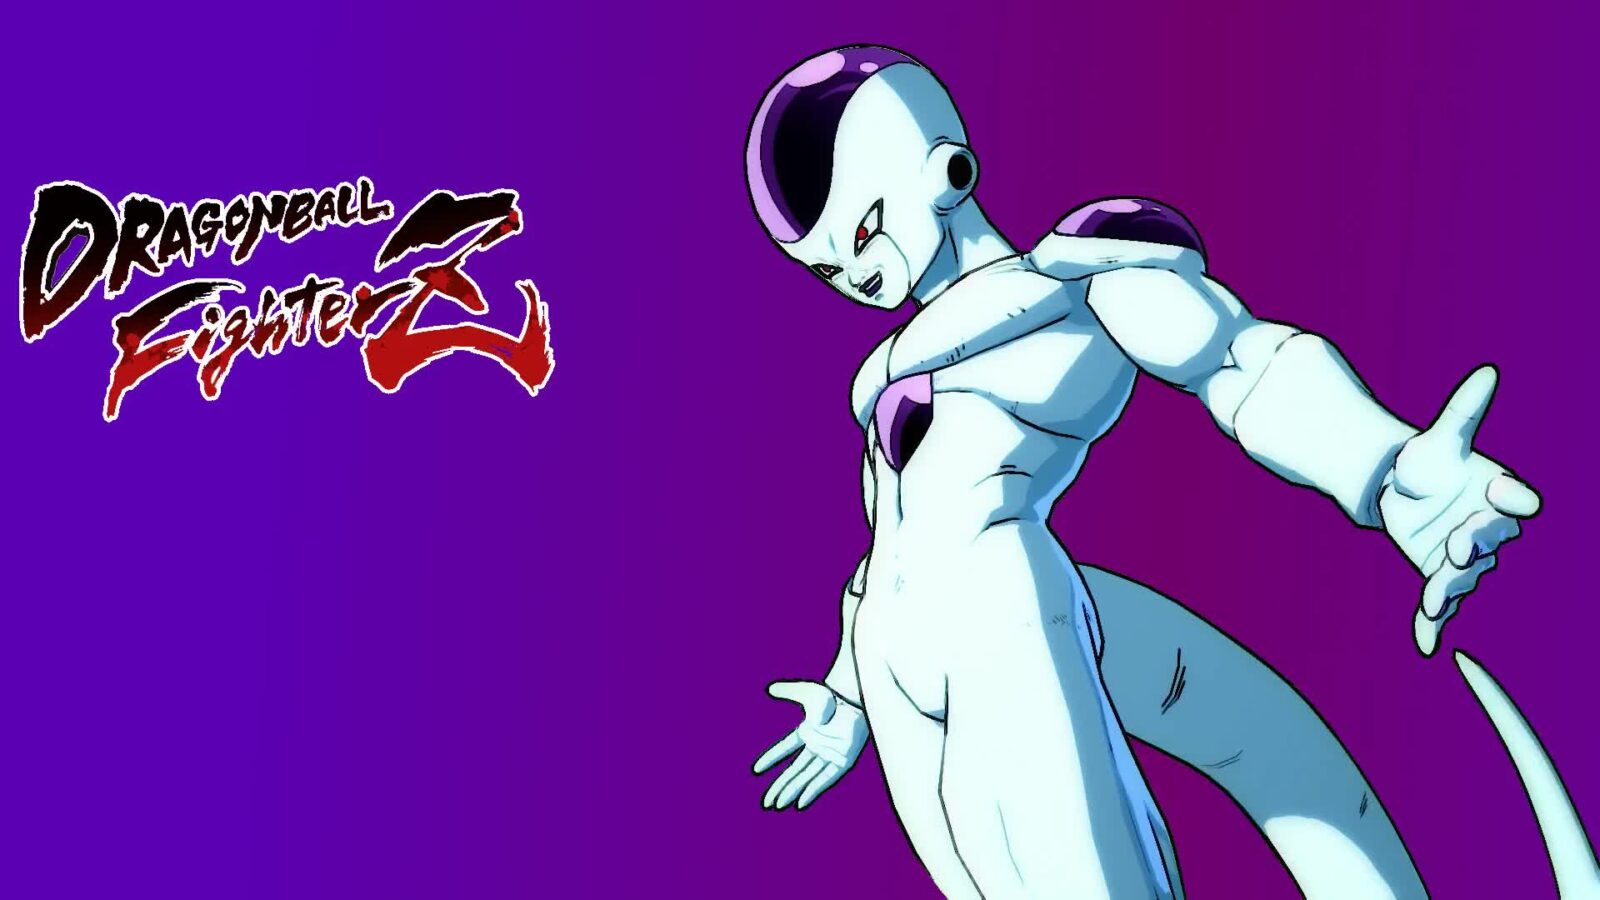 LiveWallpapers4Free.com | Dragon Ball FighterZ Frieza - Free Live Wallpaper